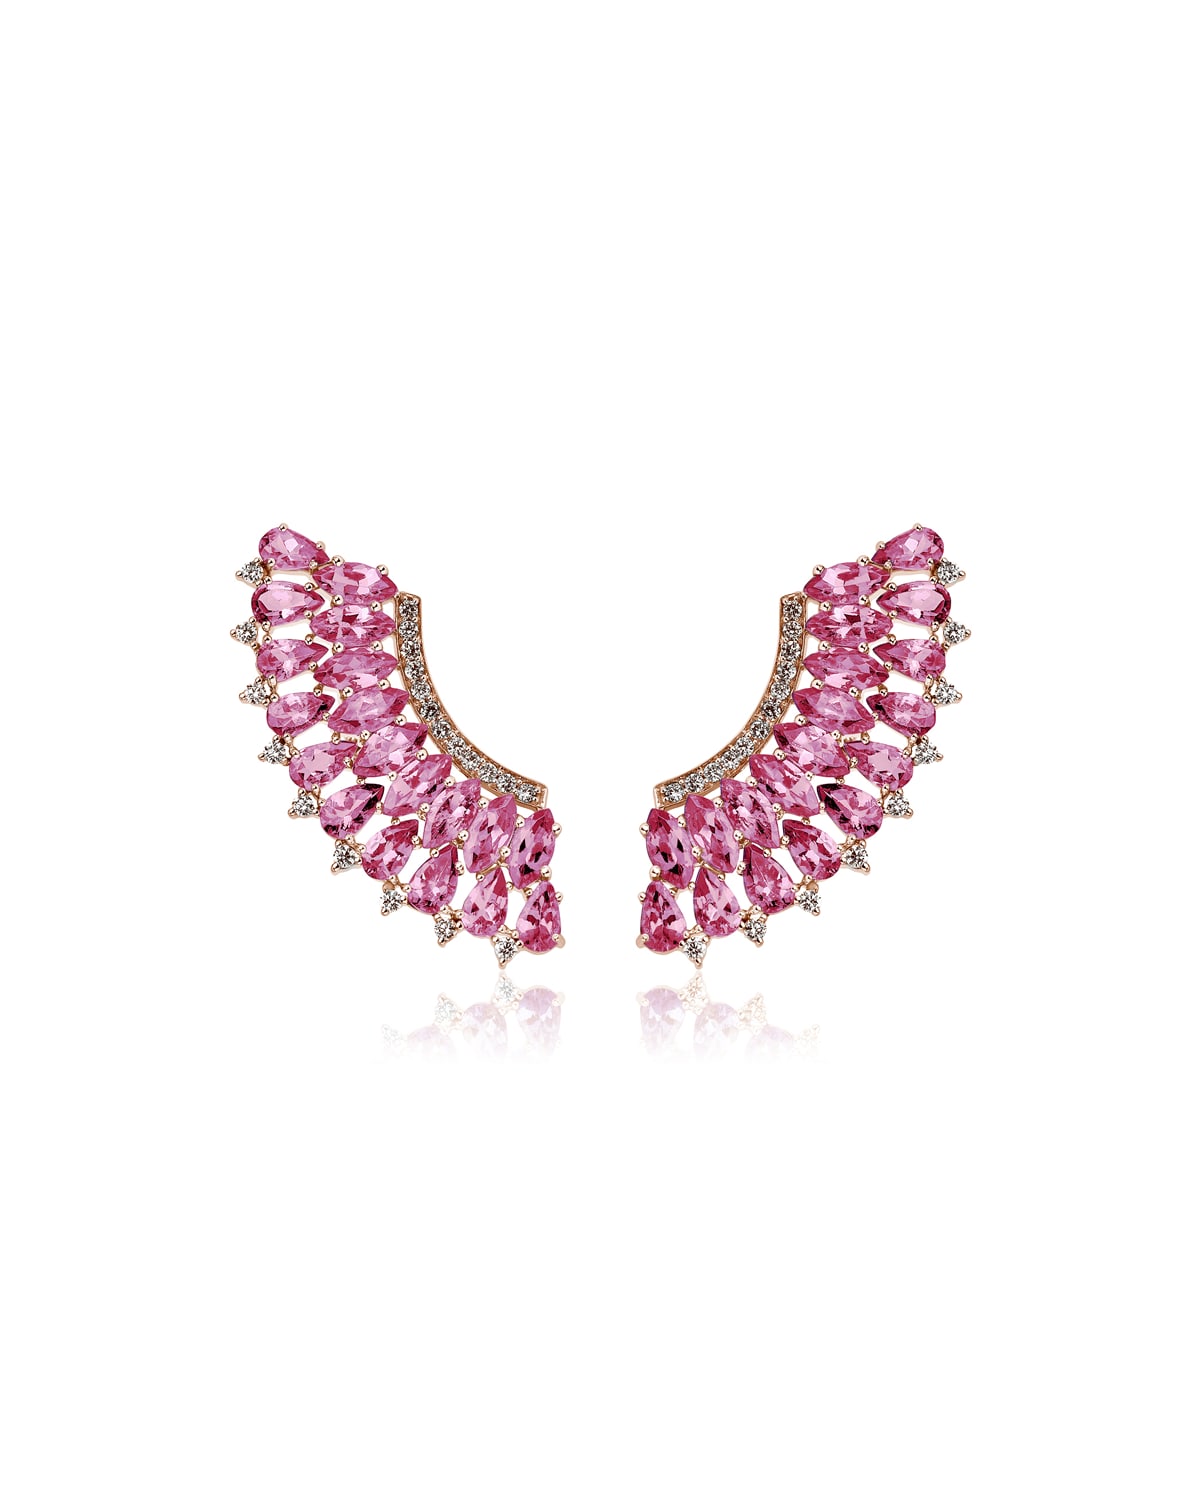 Hueb Mirage 18k Pink Gold Pink Sapphire And Diamond Pave Earrings